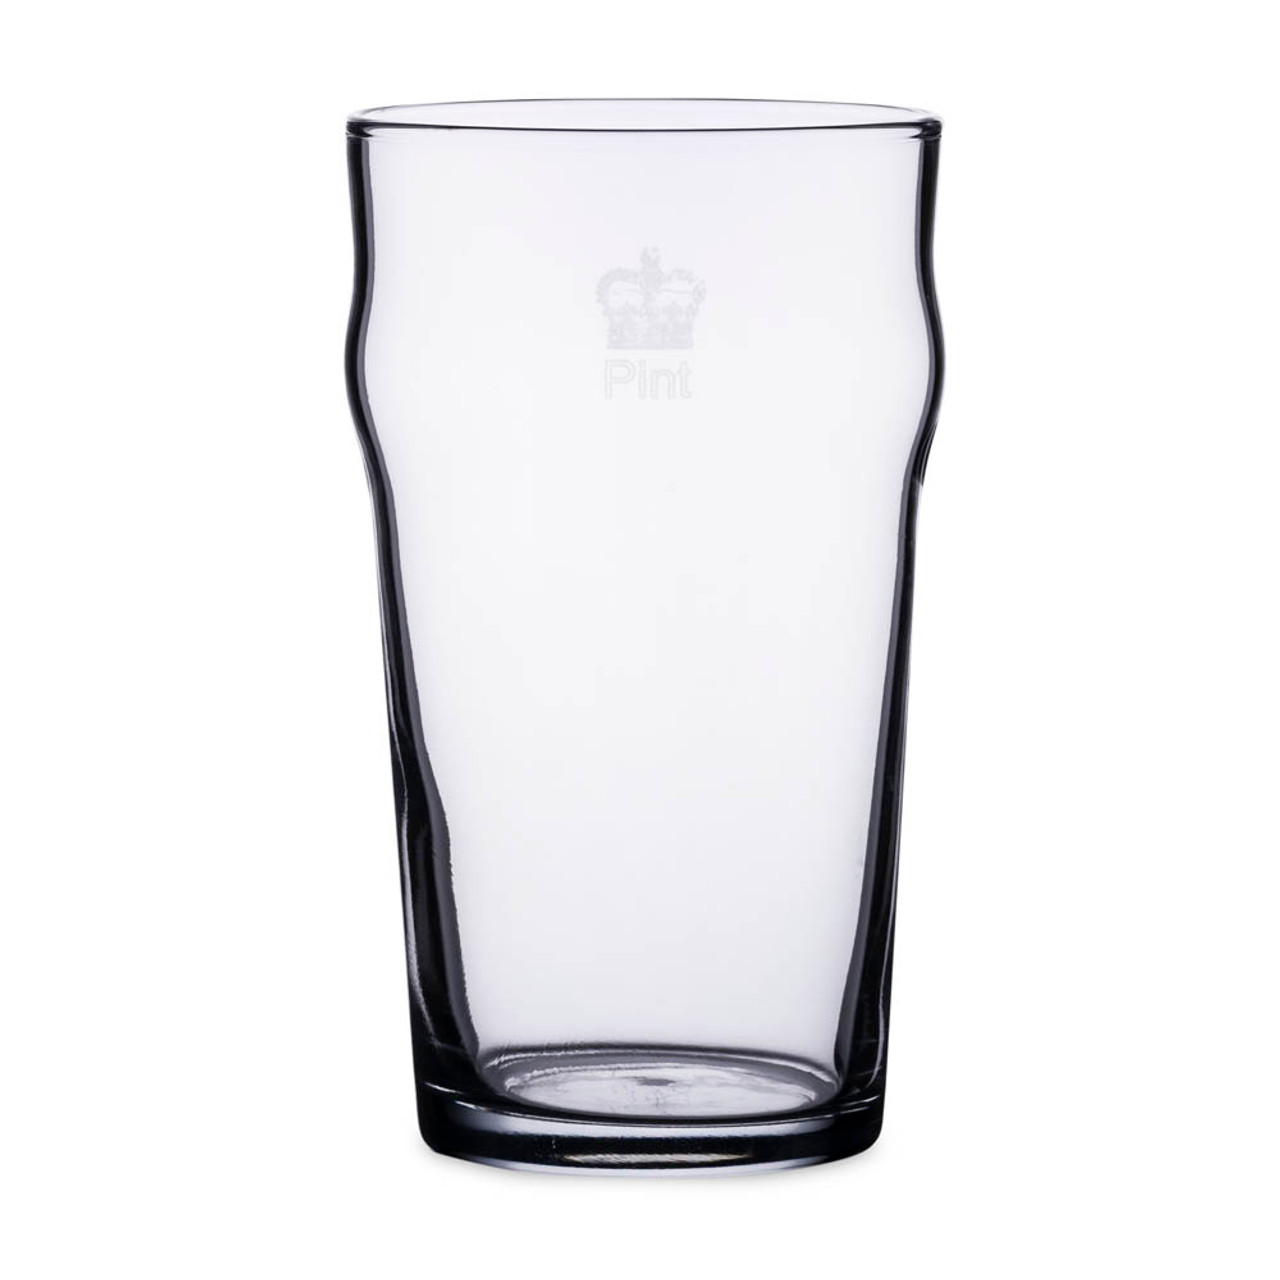 Authentic British Style Imperial Pint Glass with Etched Seal